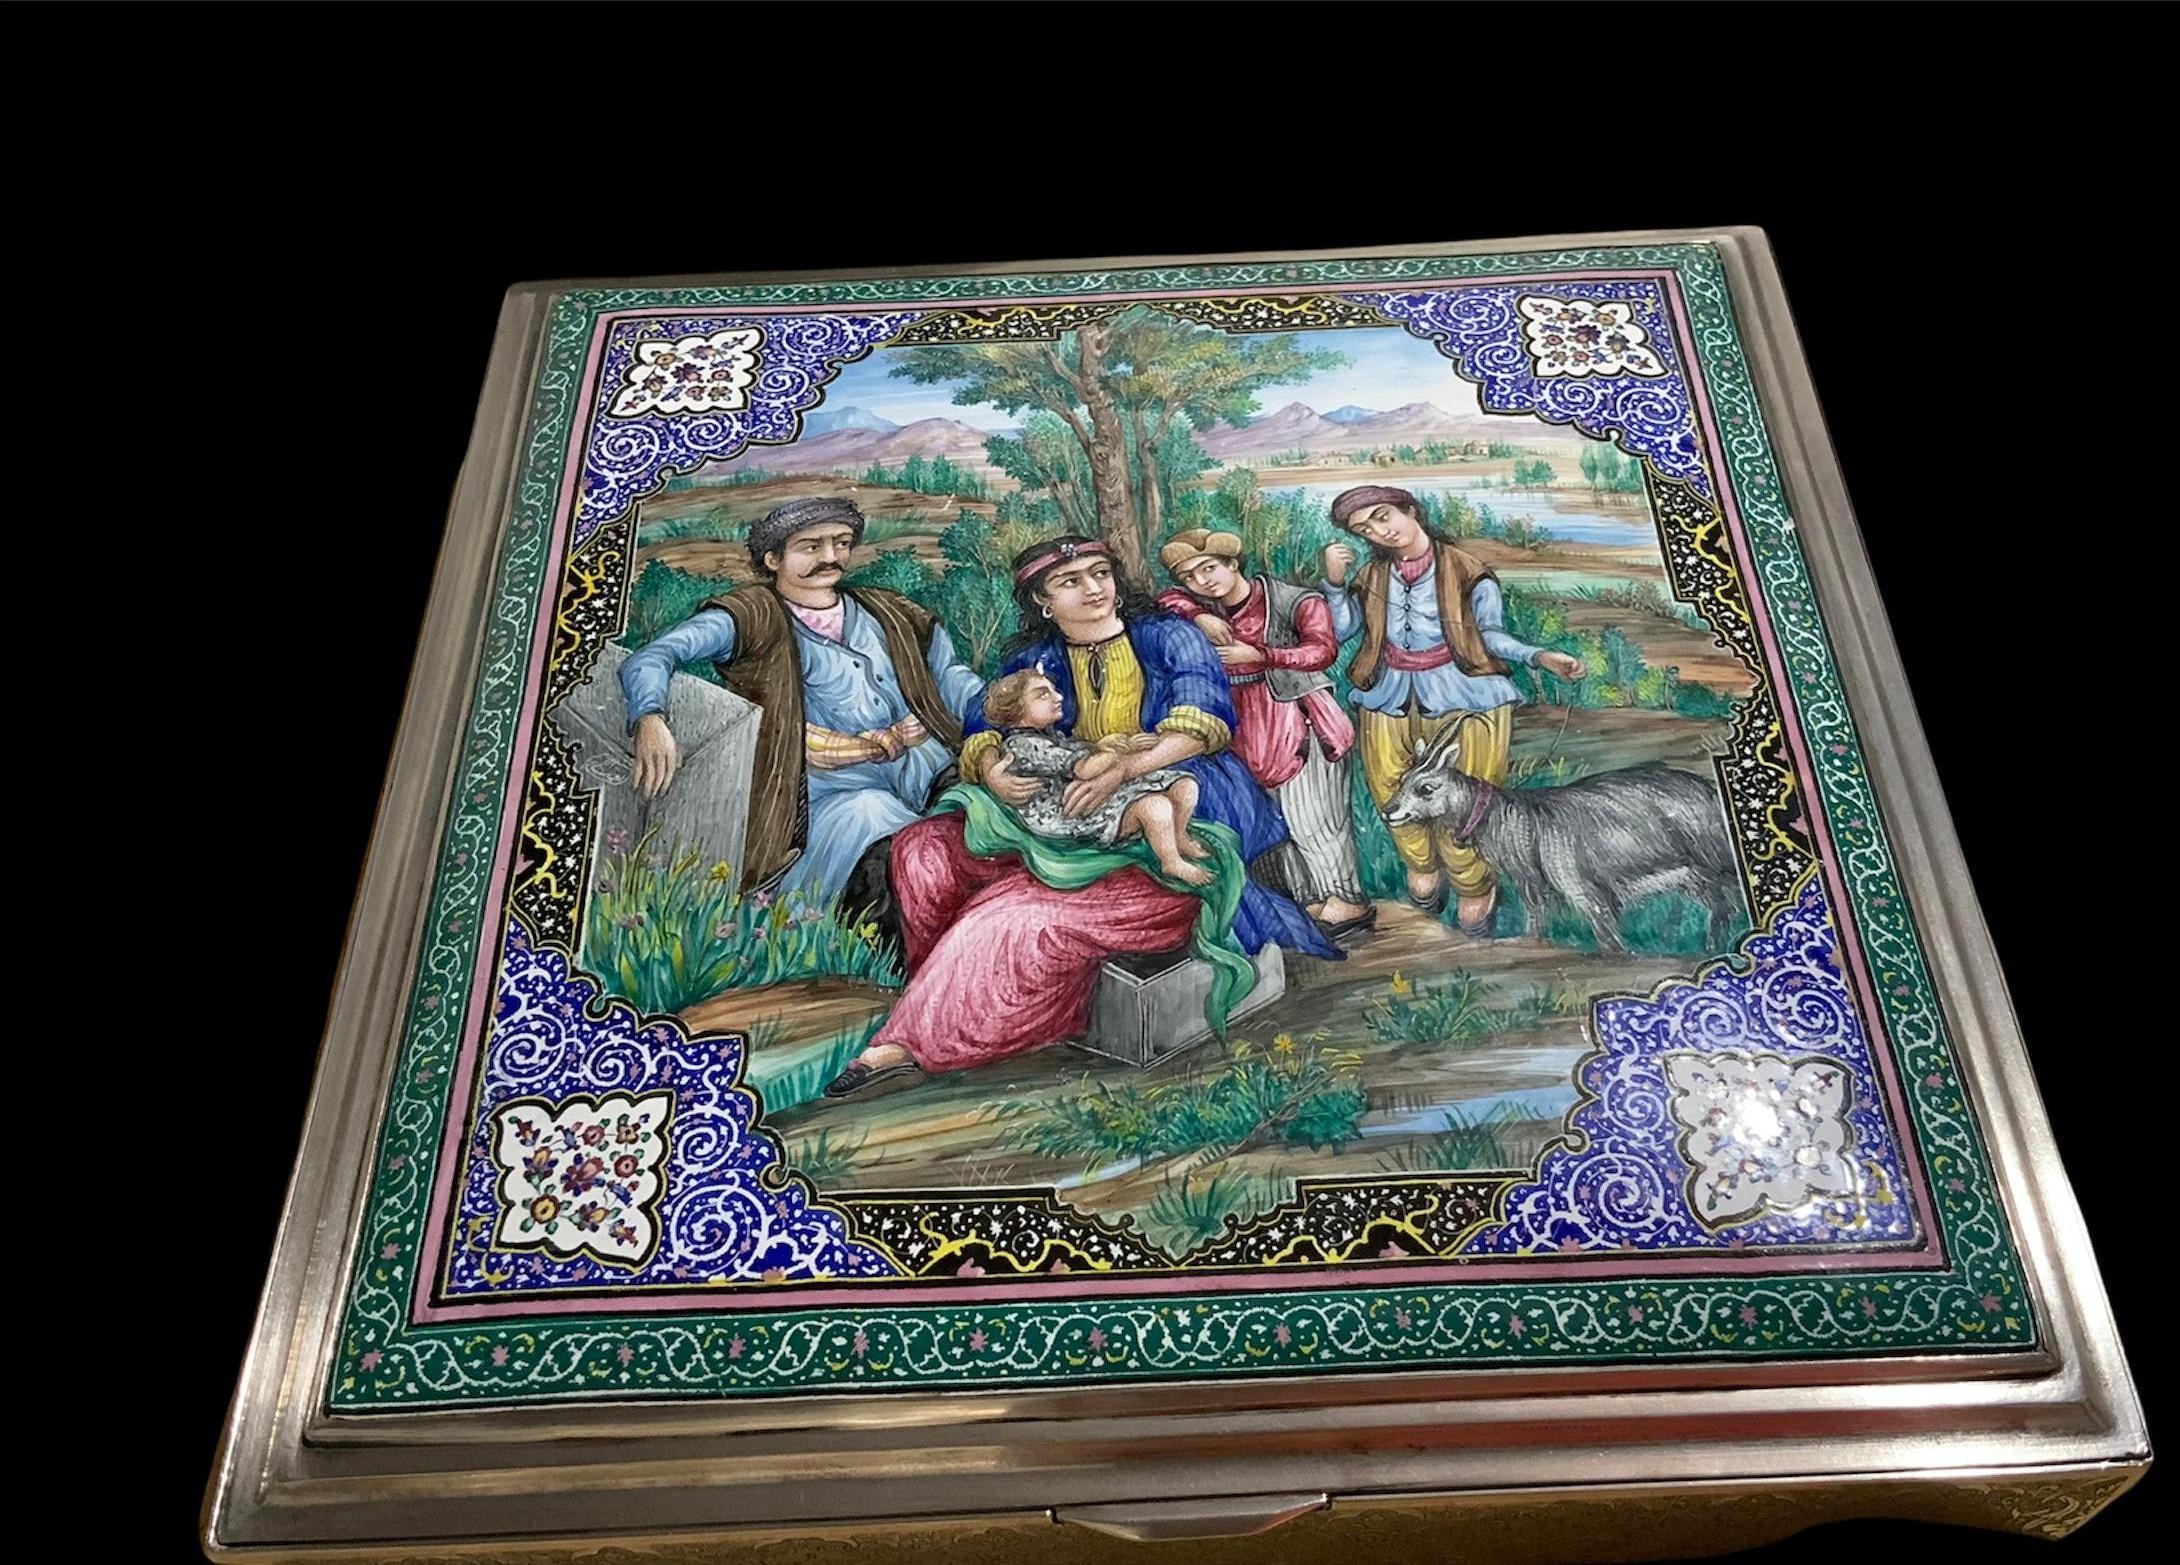 This is a large squared shaped Persian enameled painting silver box. It depicts a scene of a Persian family with the parent seated and their three children in front of a tree at a country side. One of them is holding a goat. In the back, you can see